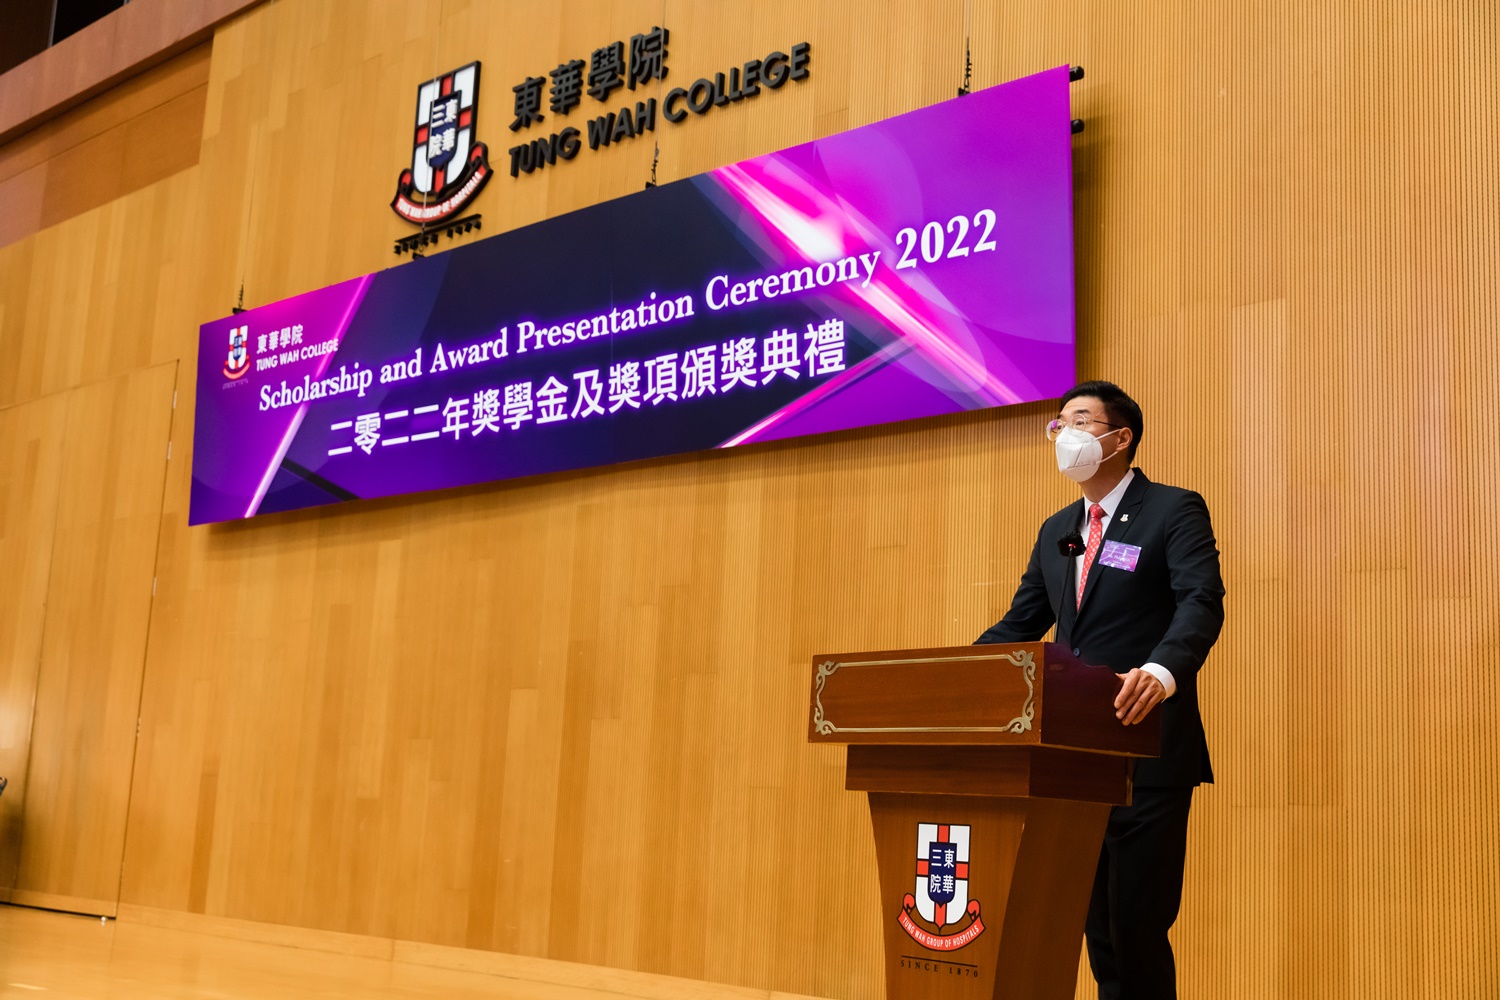 Mr. Philip Ma Ching-yeung, Chairman of Tung Wah Group of Hospitals (TWGHs) Board of Directors 2022/2023 cum Chairman of Board of Governors of TWC, gave the welcome speech at the ceremony.